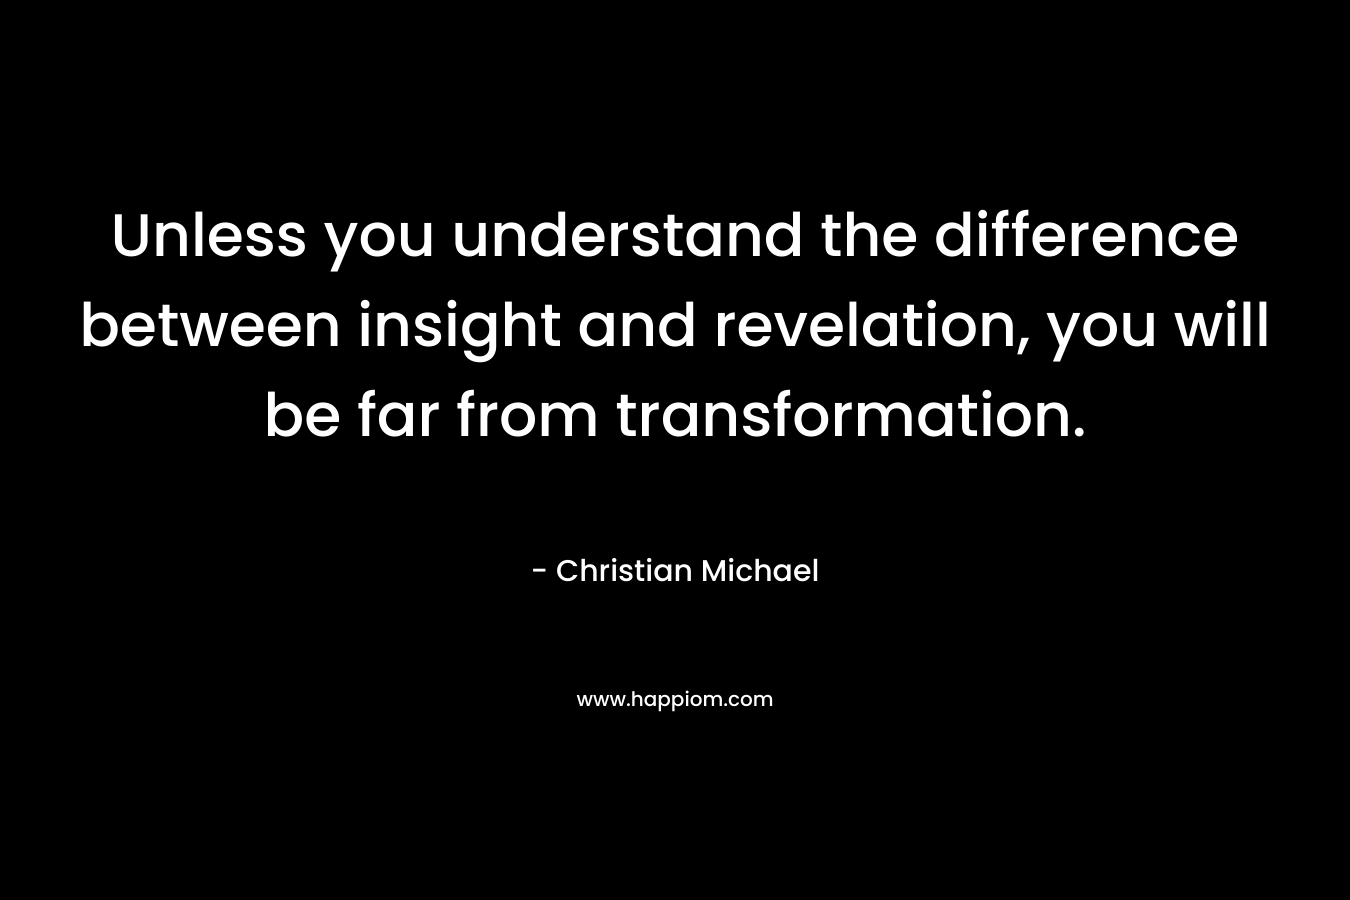 Unless you understand the difference between insight and revelation, you will be far from transformation.